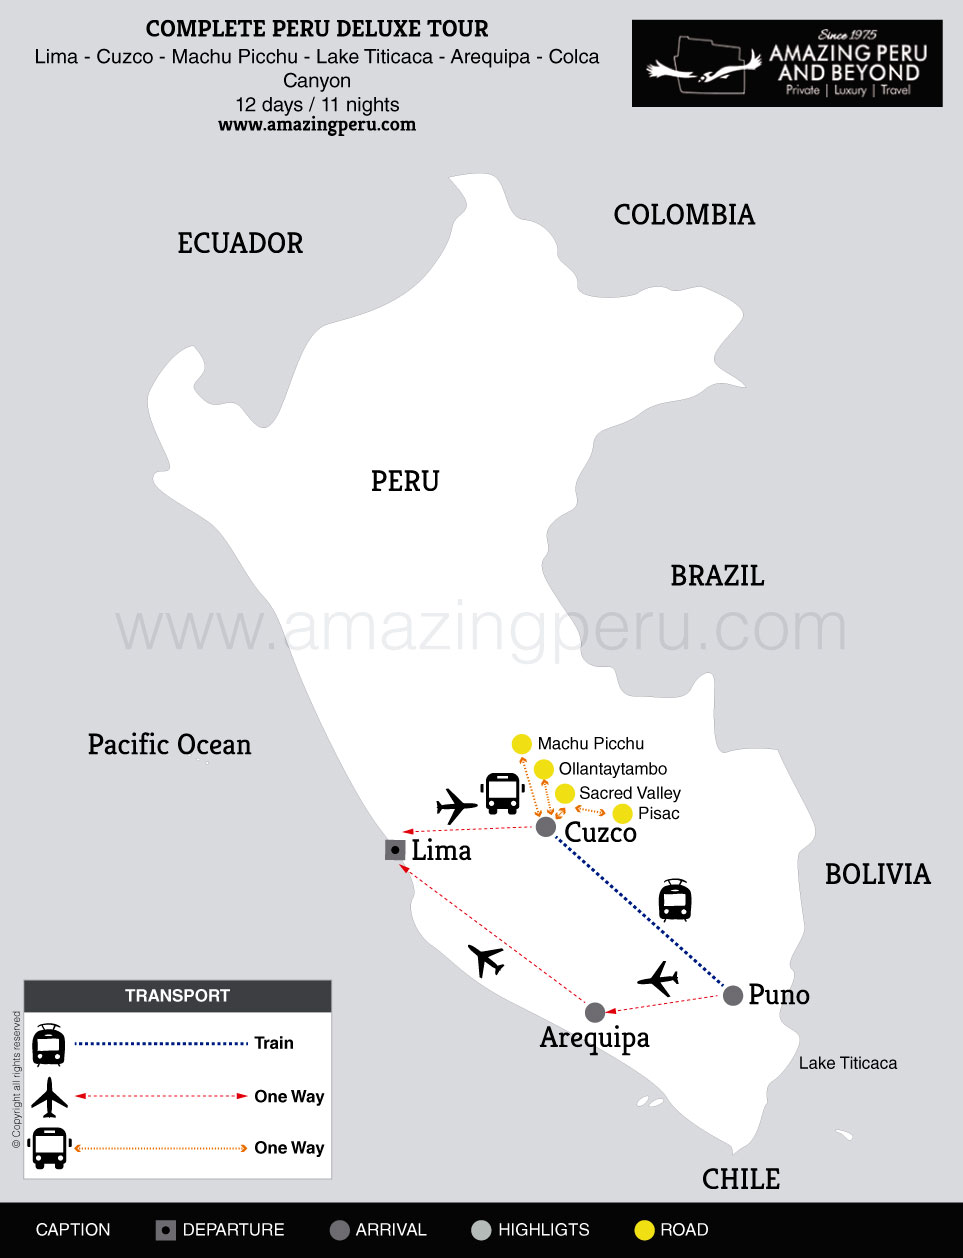 2023 Complete Peru Deluxe Tour - 12 days / 11 nights.